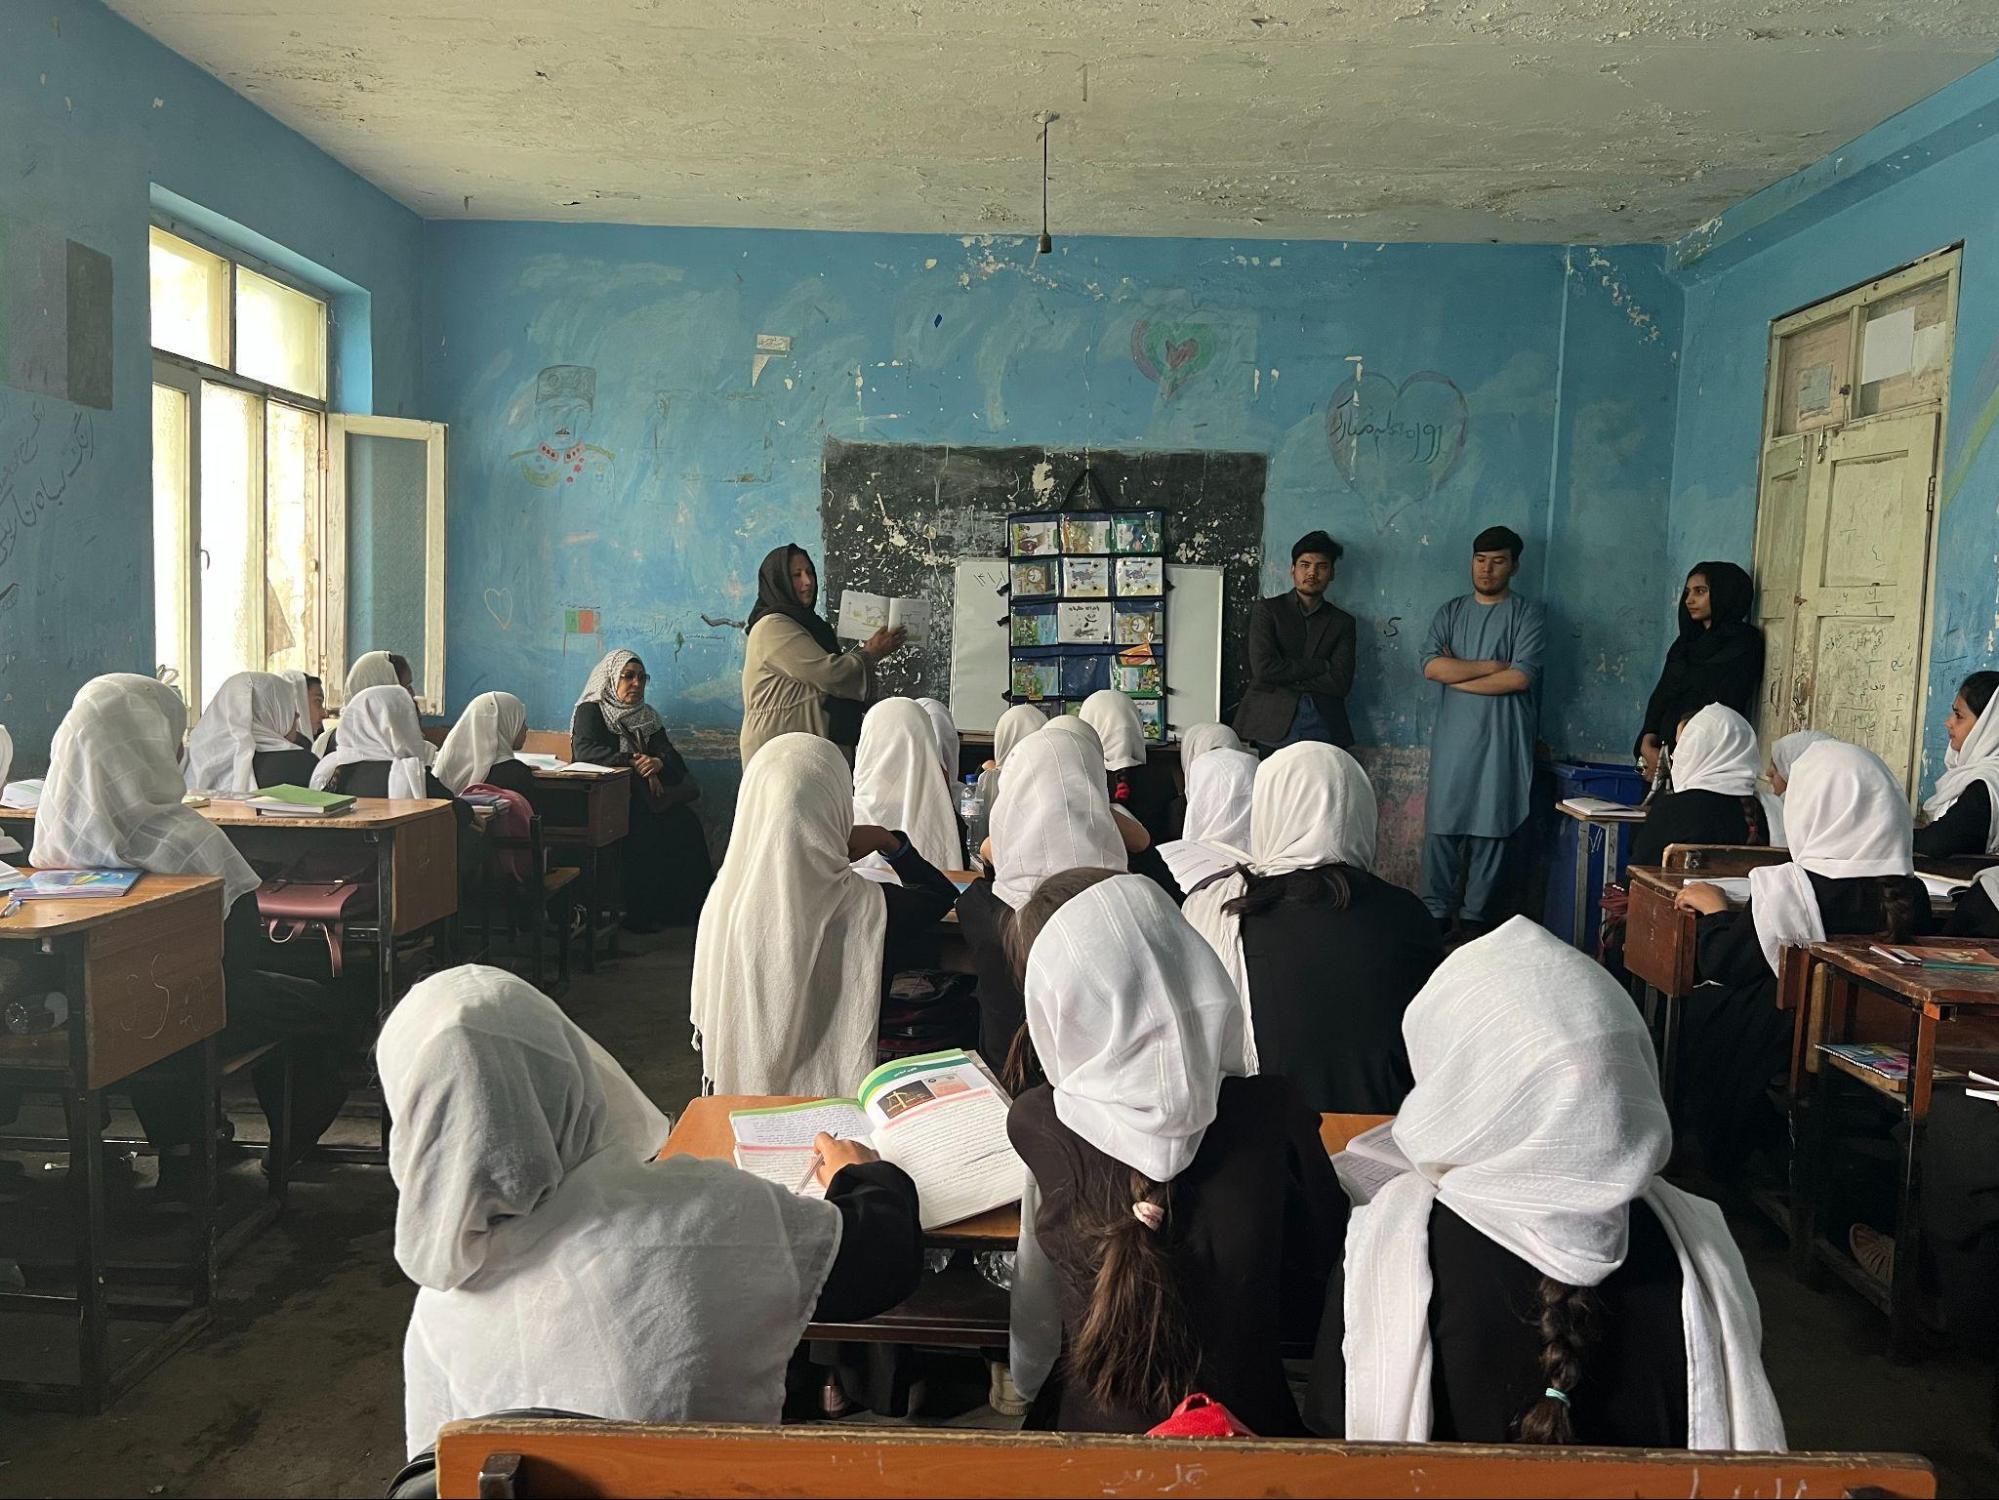 Girls in a classroom in Afghanistan